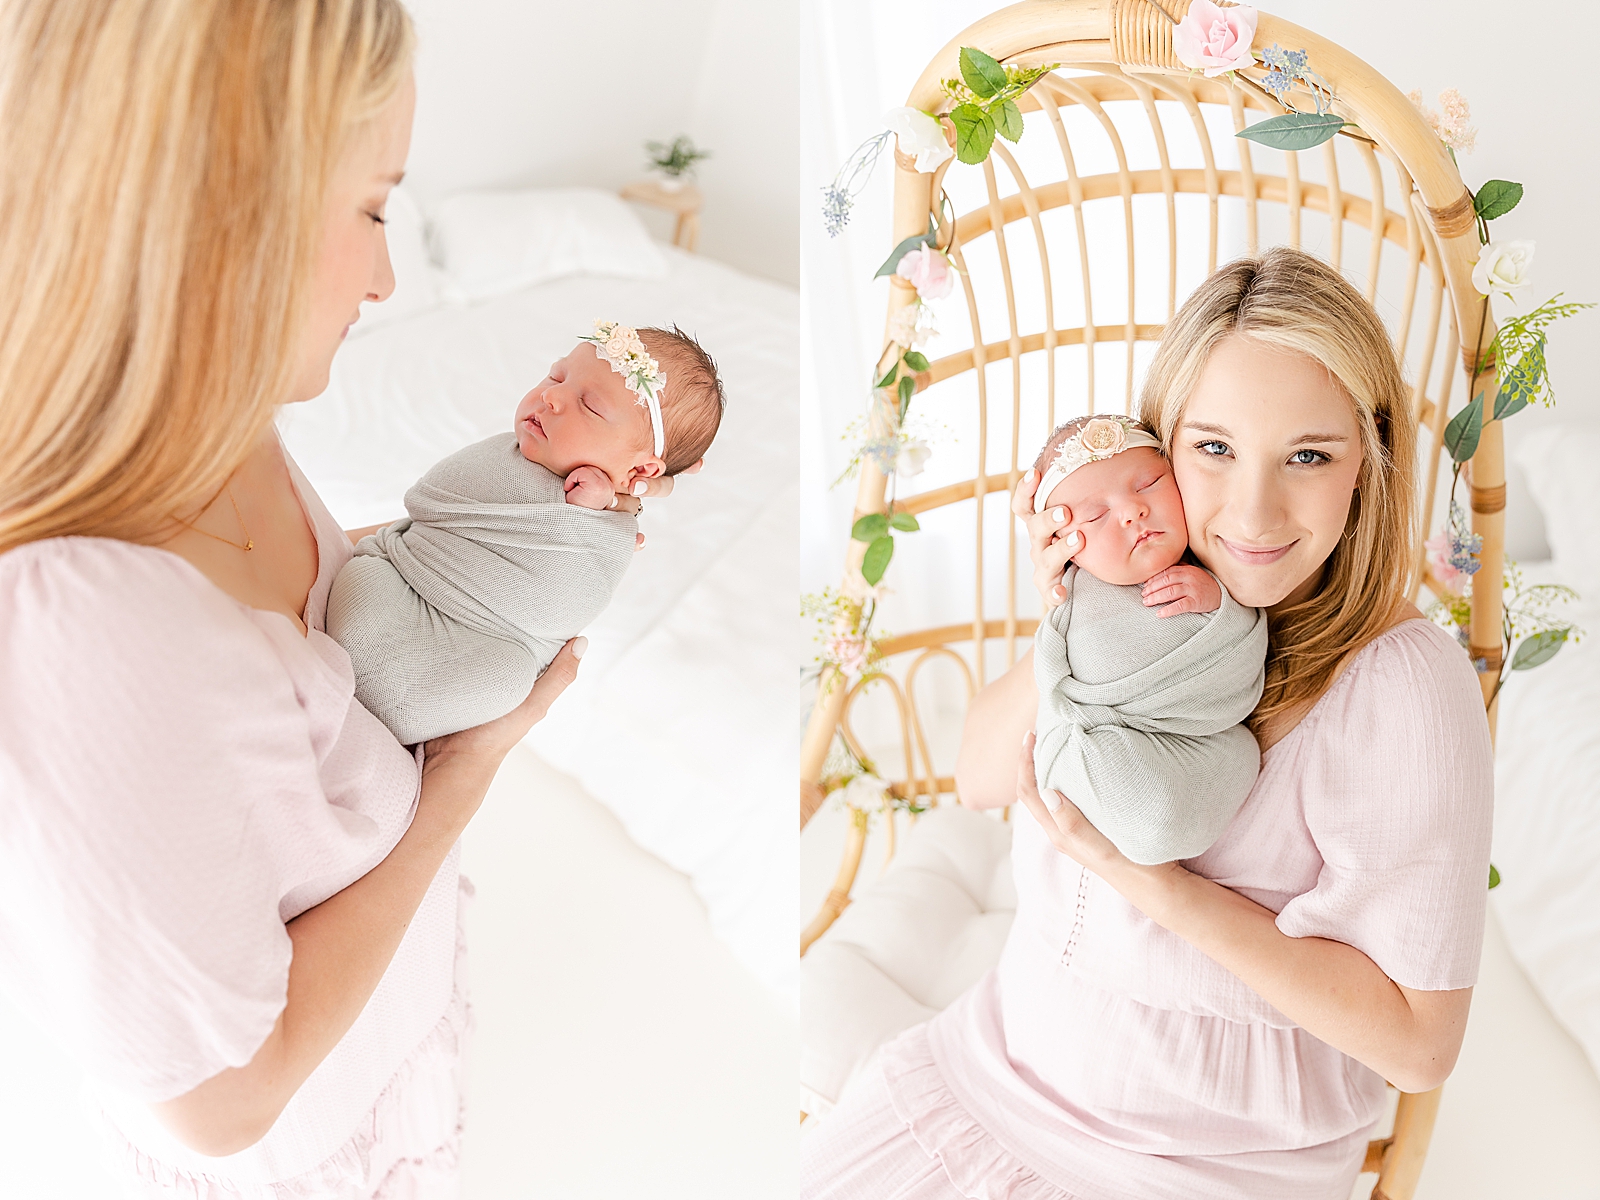 Mom smiling down at swaddled baby in her arms and mom cheek to cheek with her swaddled newborn baby sitting in boho flower chair for lifestyle newborn pictures